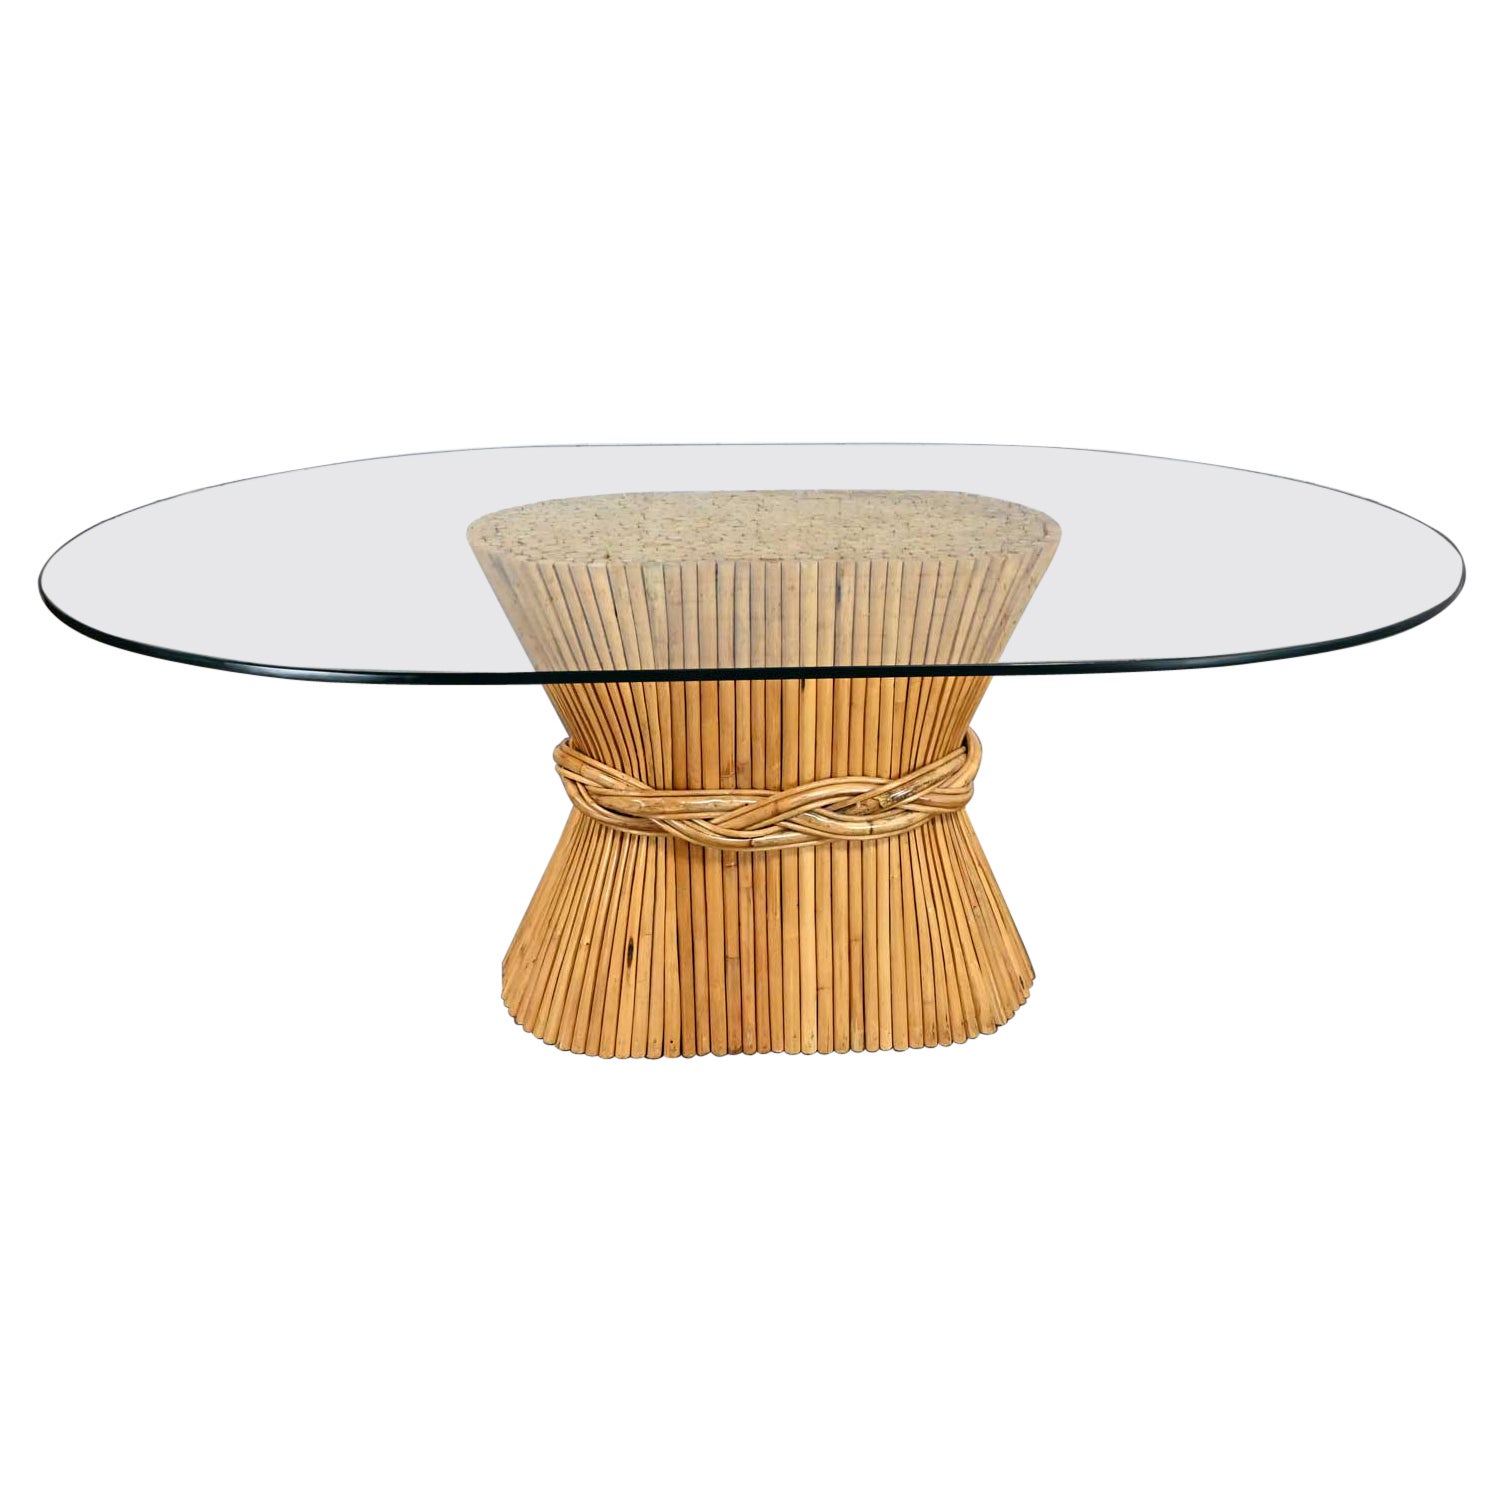 McGuire Style Racetrack Oval Rattan Sheaf of Wheat Glass Top Dining Table For Sale